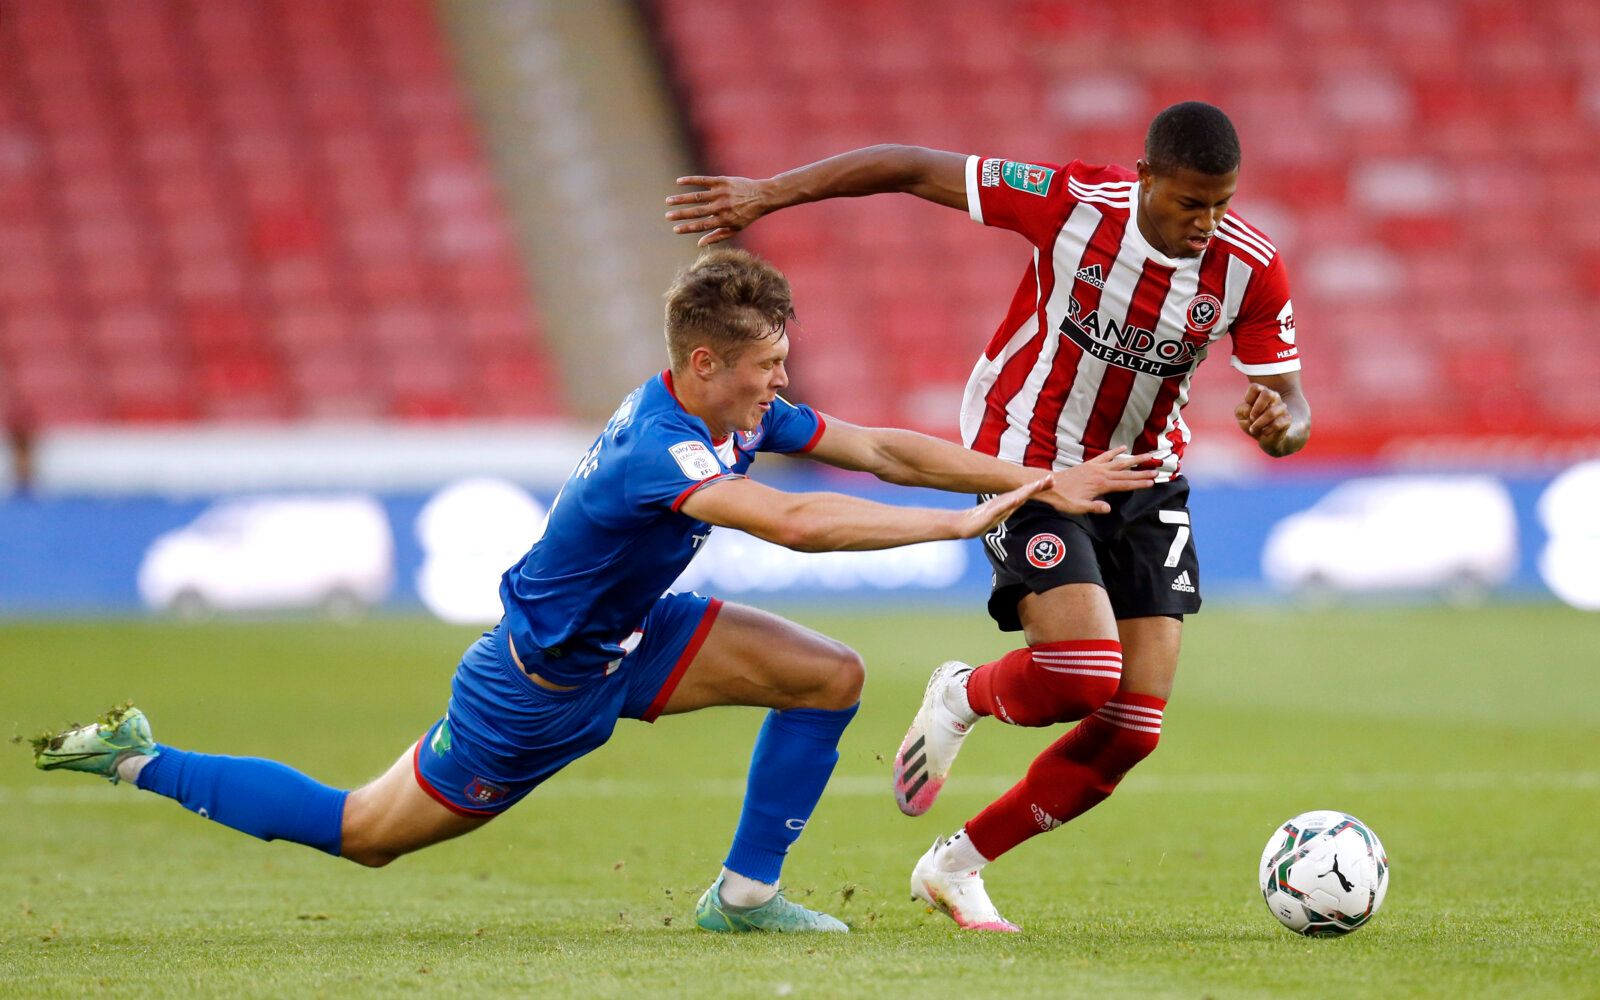 Soccer Football - Carabao Cup - First Round - Sheffield United v Carlisle United - Bramall Lane, Sheffield, Britain - August 10, 2021 Sheffield United's Rhian Brewster and Carlisle United's Taylor Charters in action Action Images/Ed Sykes EDITORIAL USE ONLY. No use with unauthorized audio, video, data, fixture lists, club/league logos or 'live' services. Online in-match use limited to 75 images, no video emulation. No use in betting, games or single club /league/player publications.  Please cont